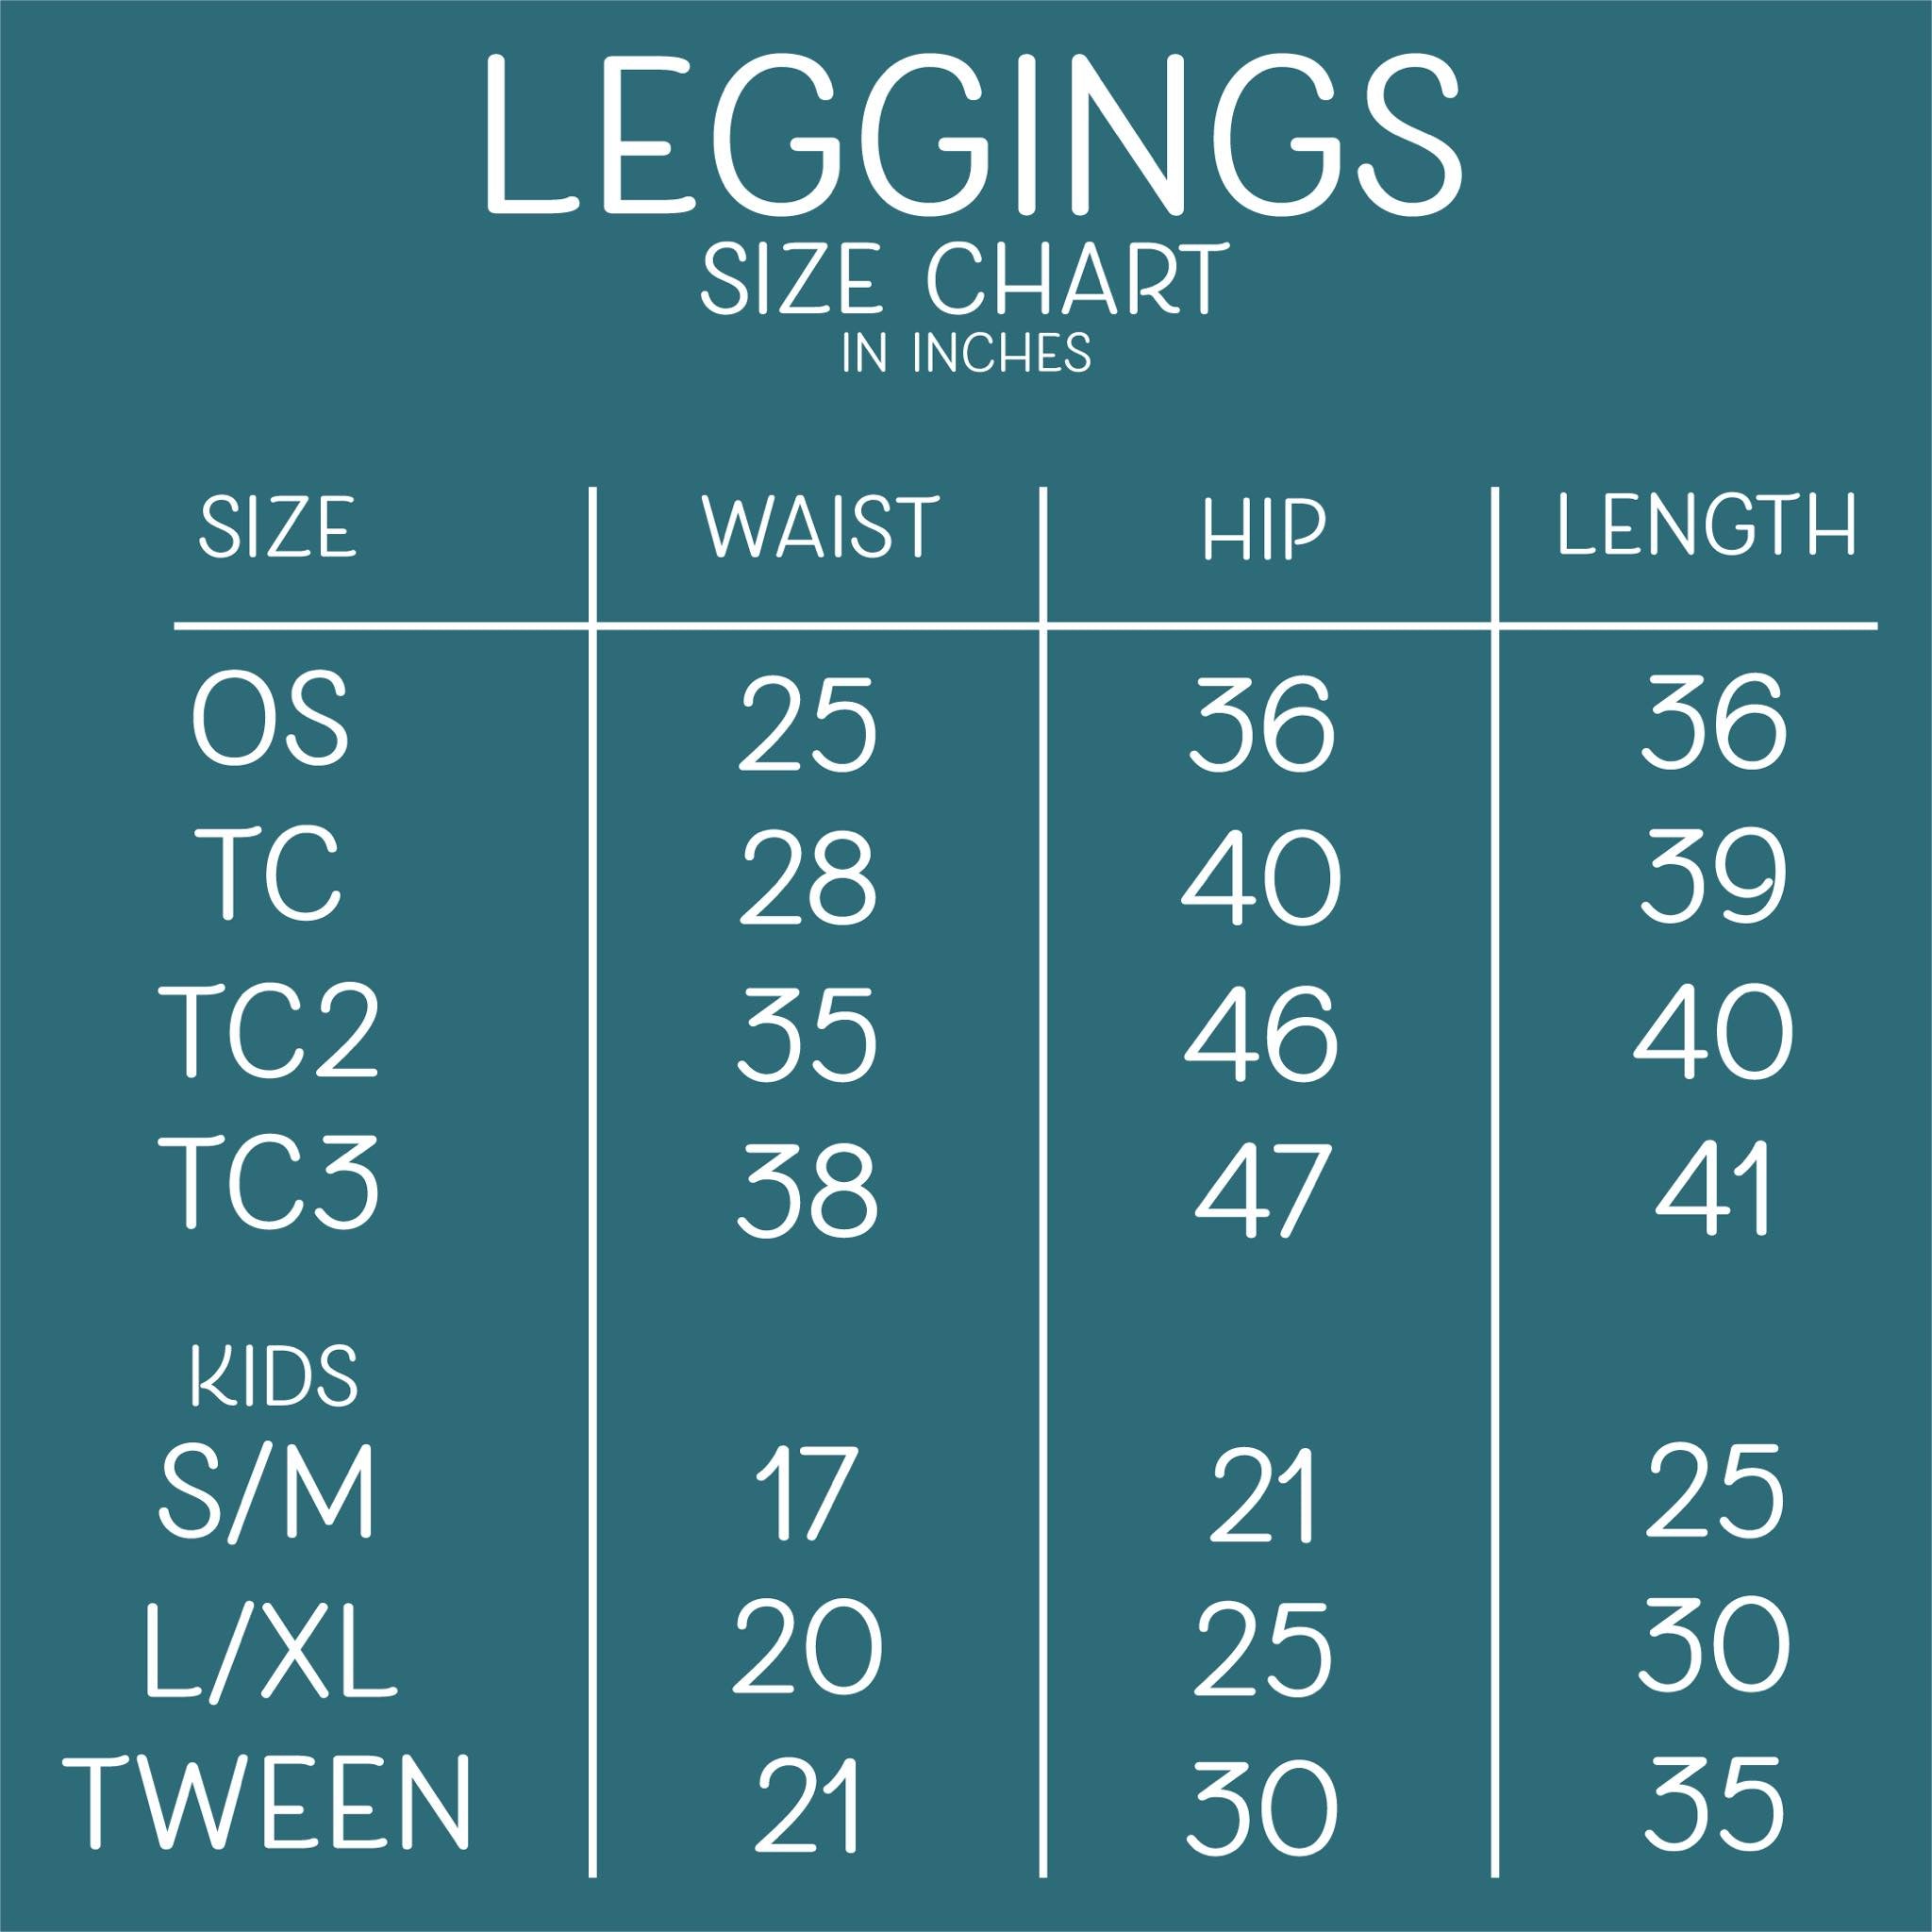 Merry F-ing Christmas Leggings Full Length With and Without Pockets Preorder 0927